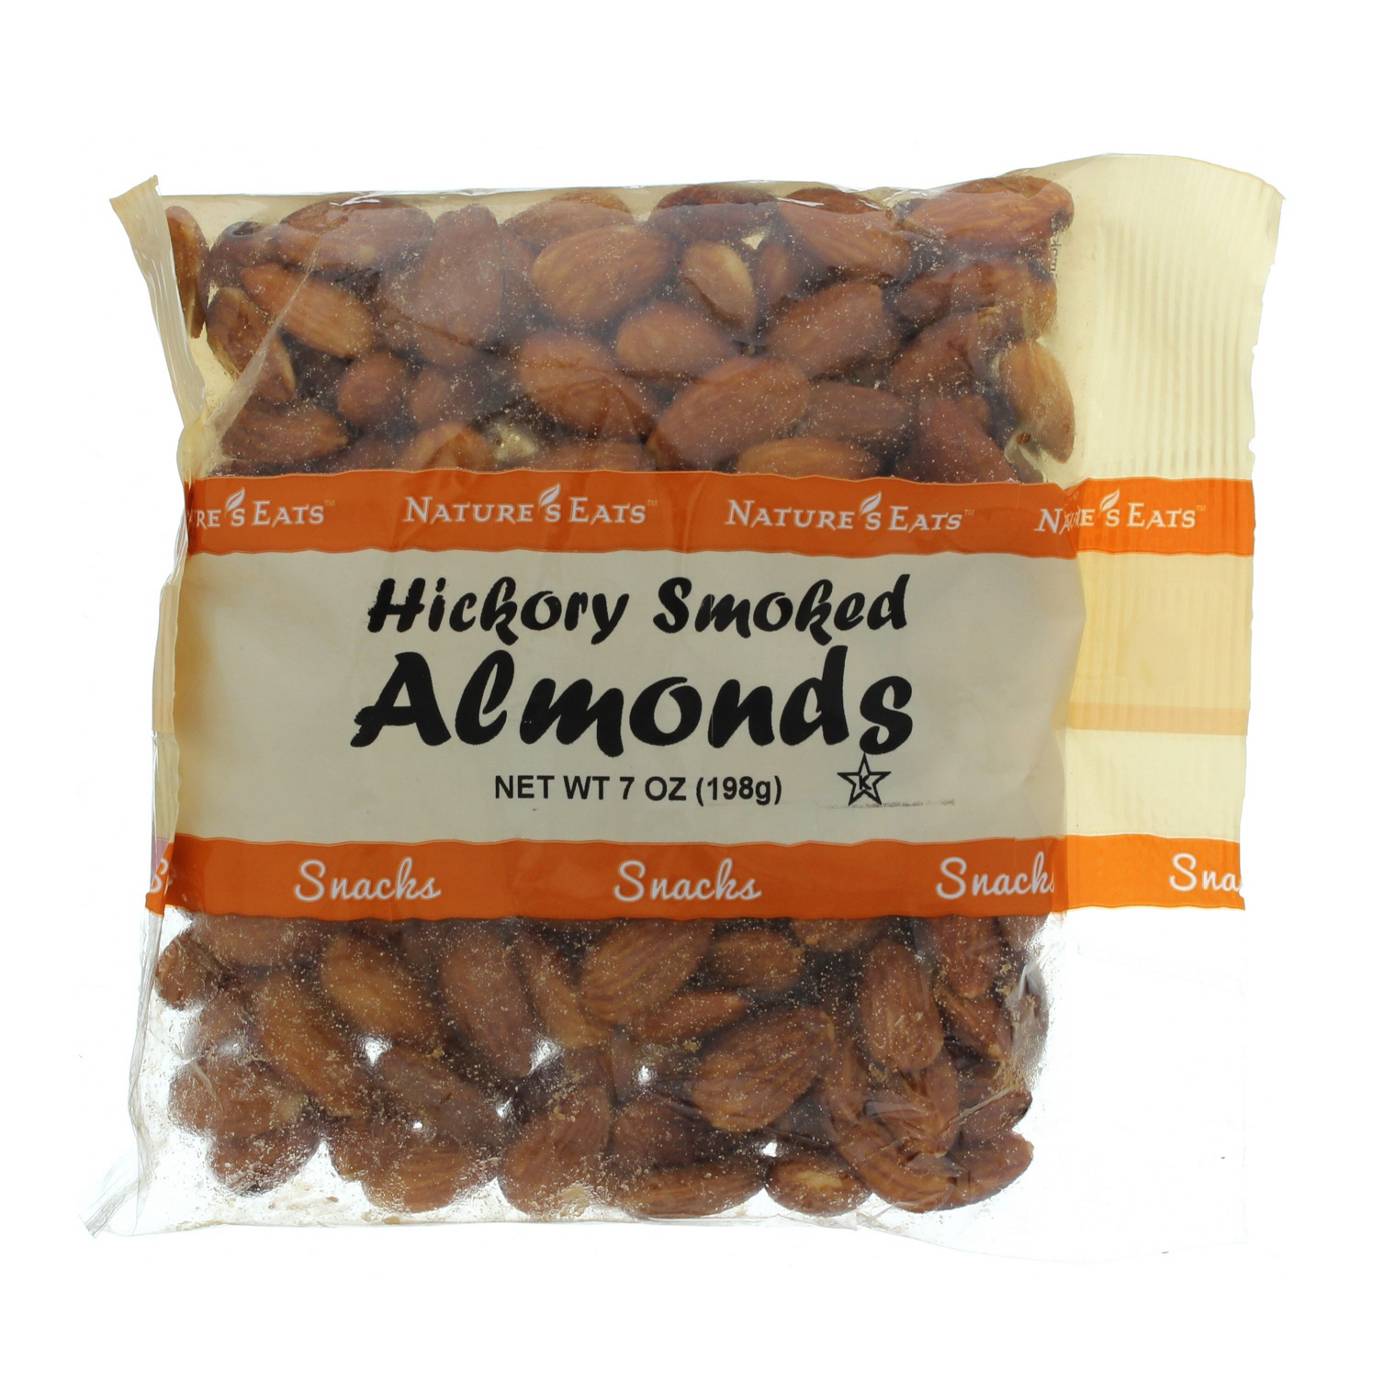 Nature's Eats Hickory Smoked Almonds; image 1 of 2